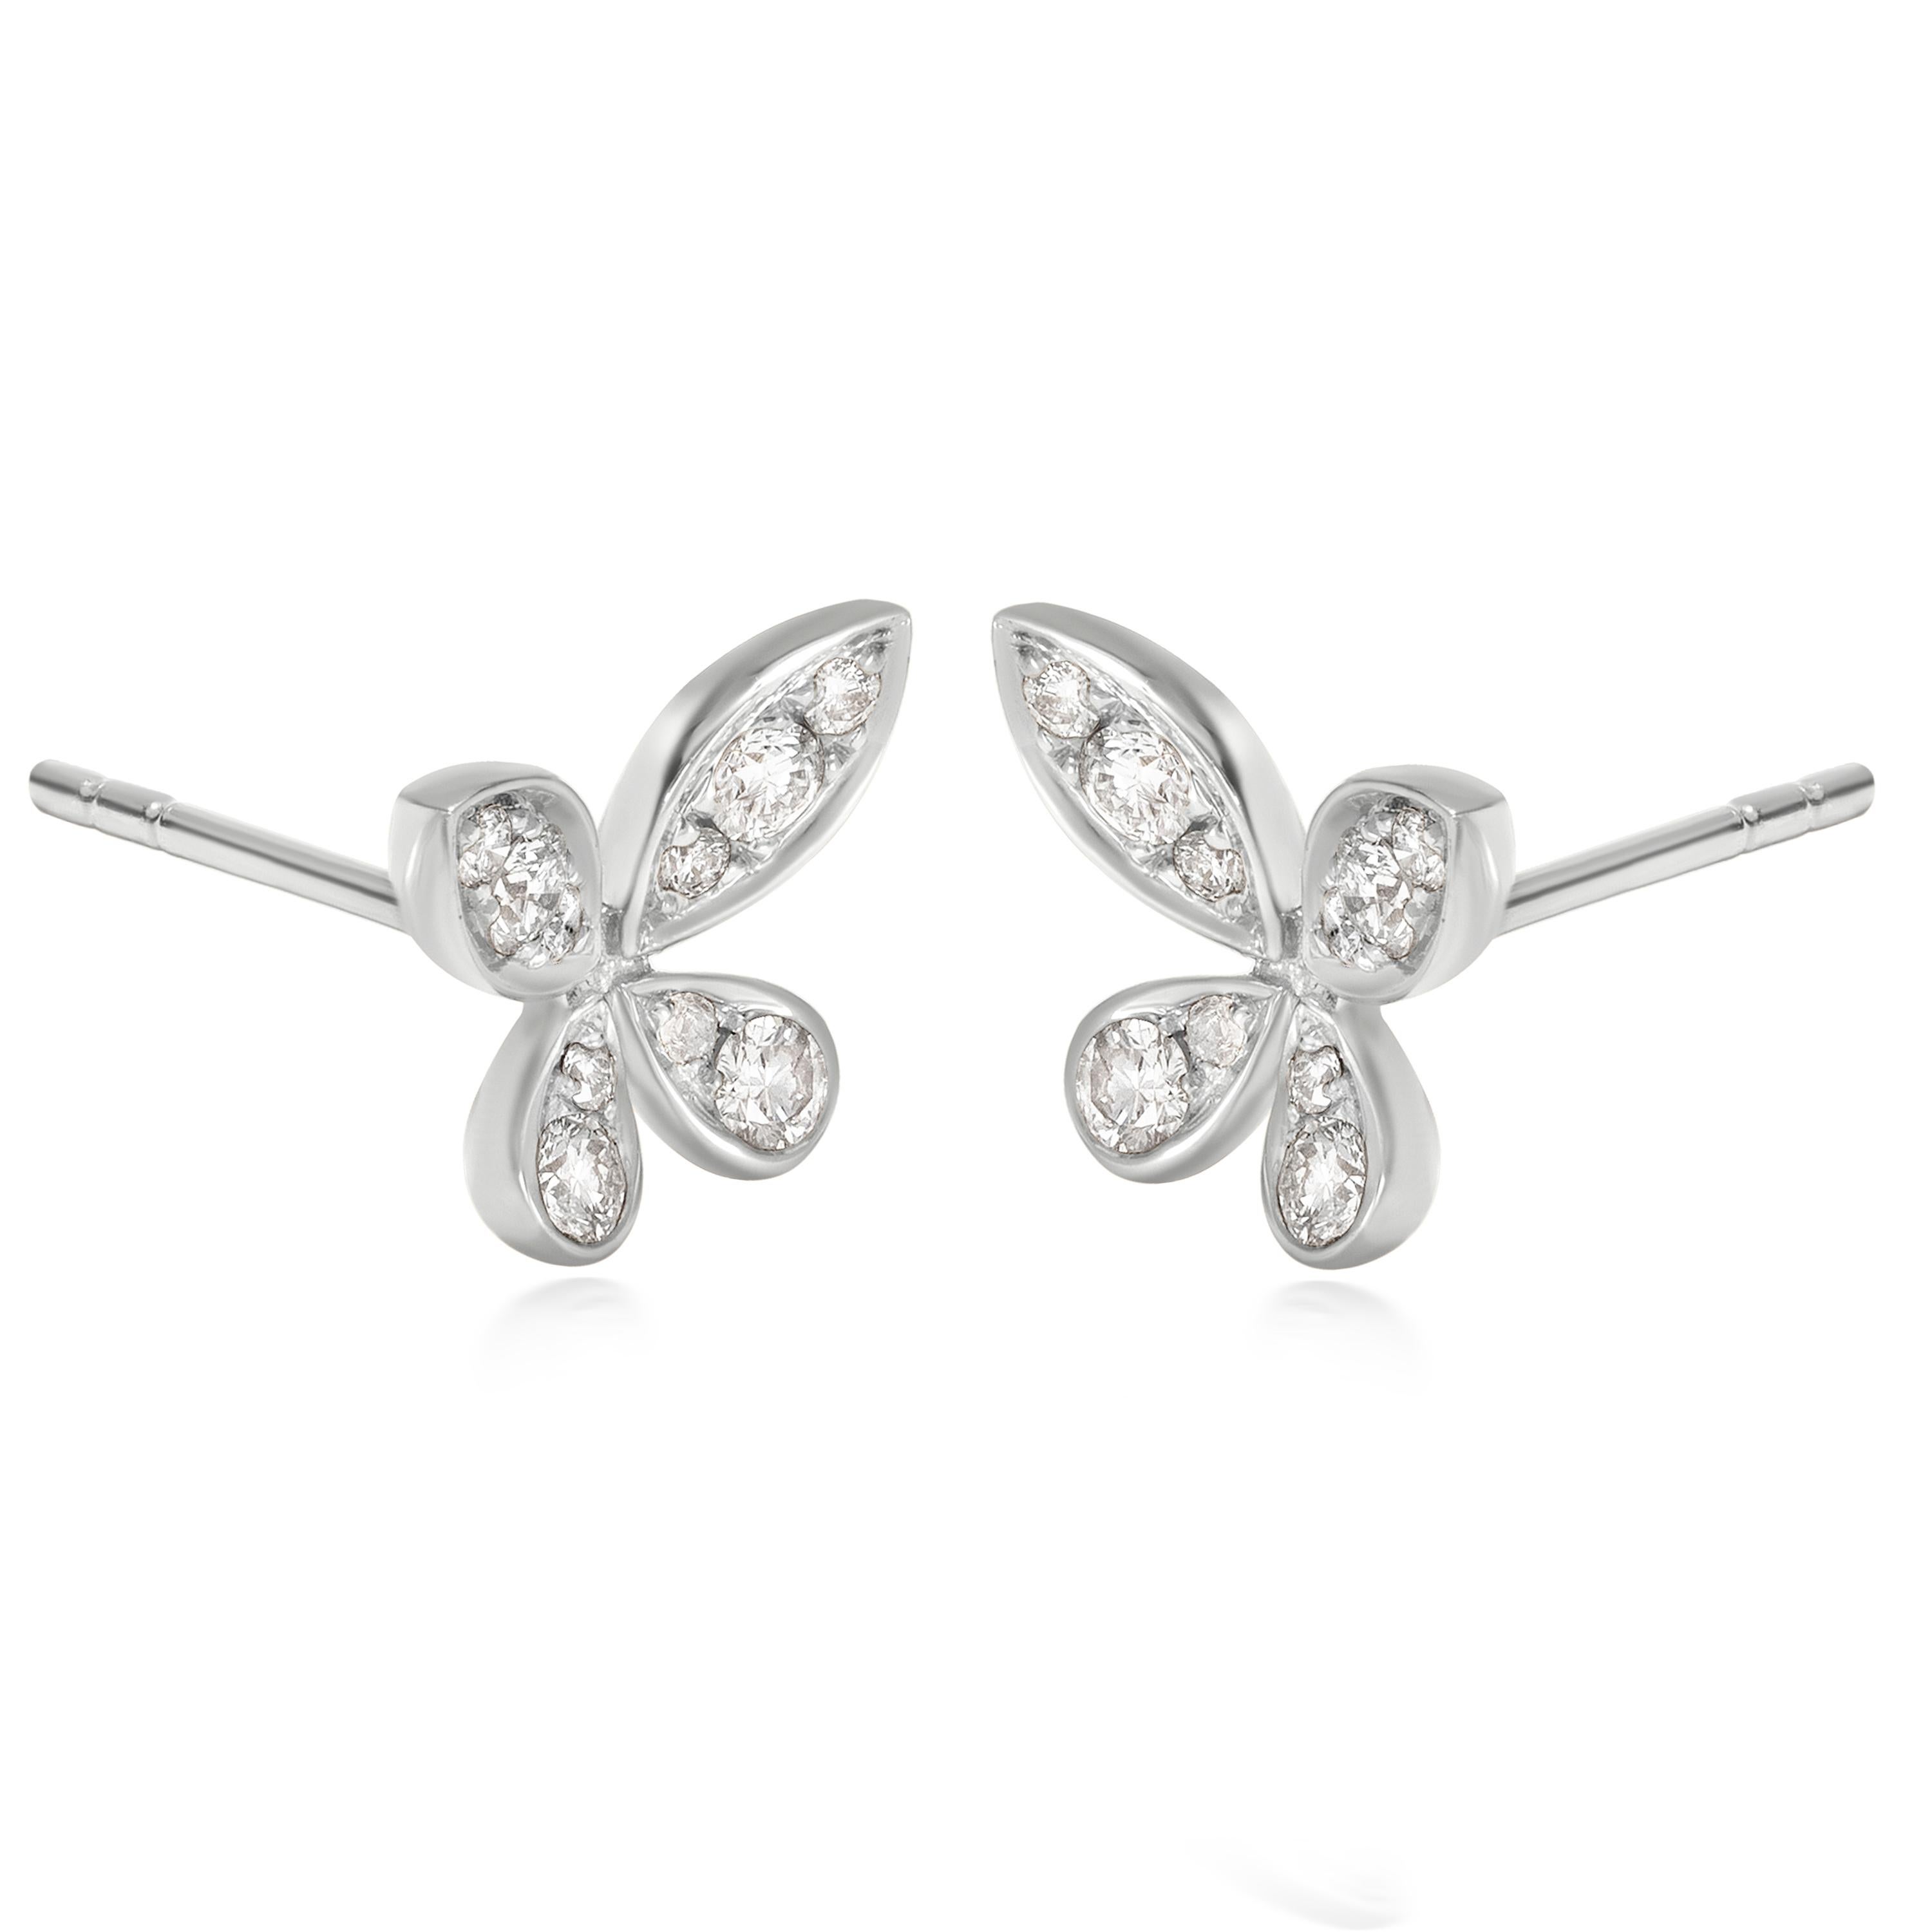 These Luxle adorable butterfly studs are studded with small and large diamonds. Each pair comes with 20 round diamonds in pave and has clutch backs.

Please follow the Luxury Jewels storefront to view the latest collections & exclusive one of a kind